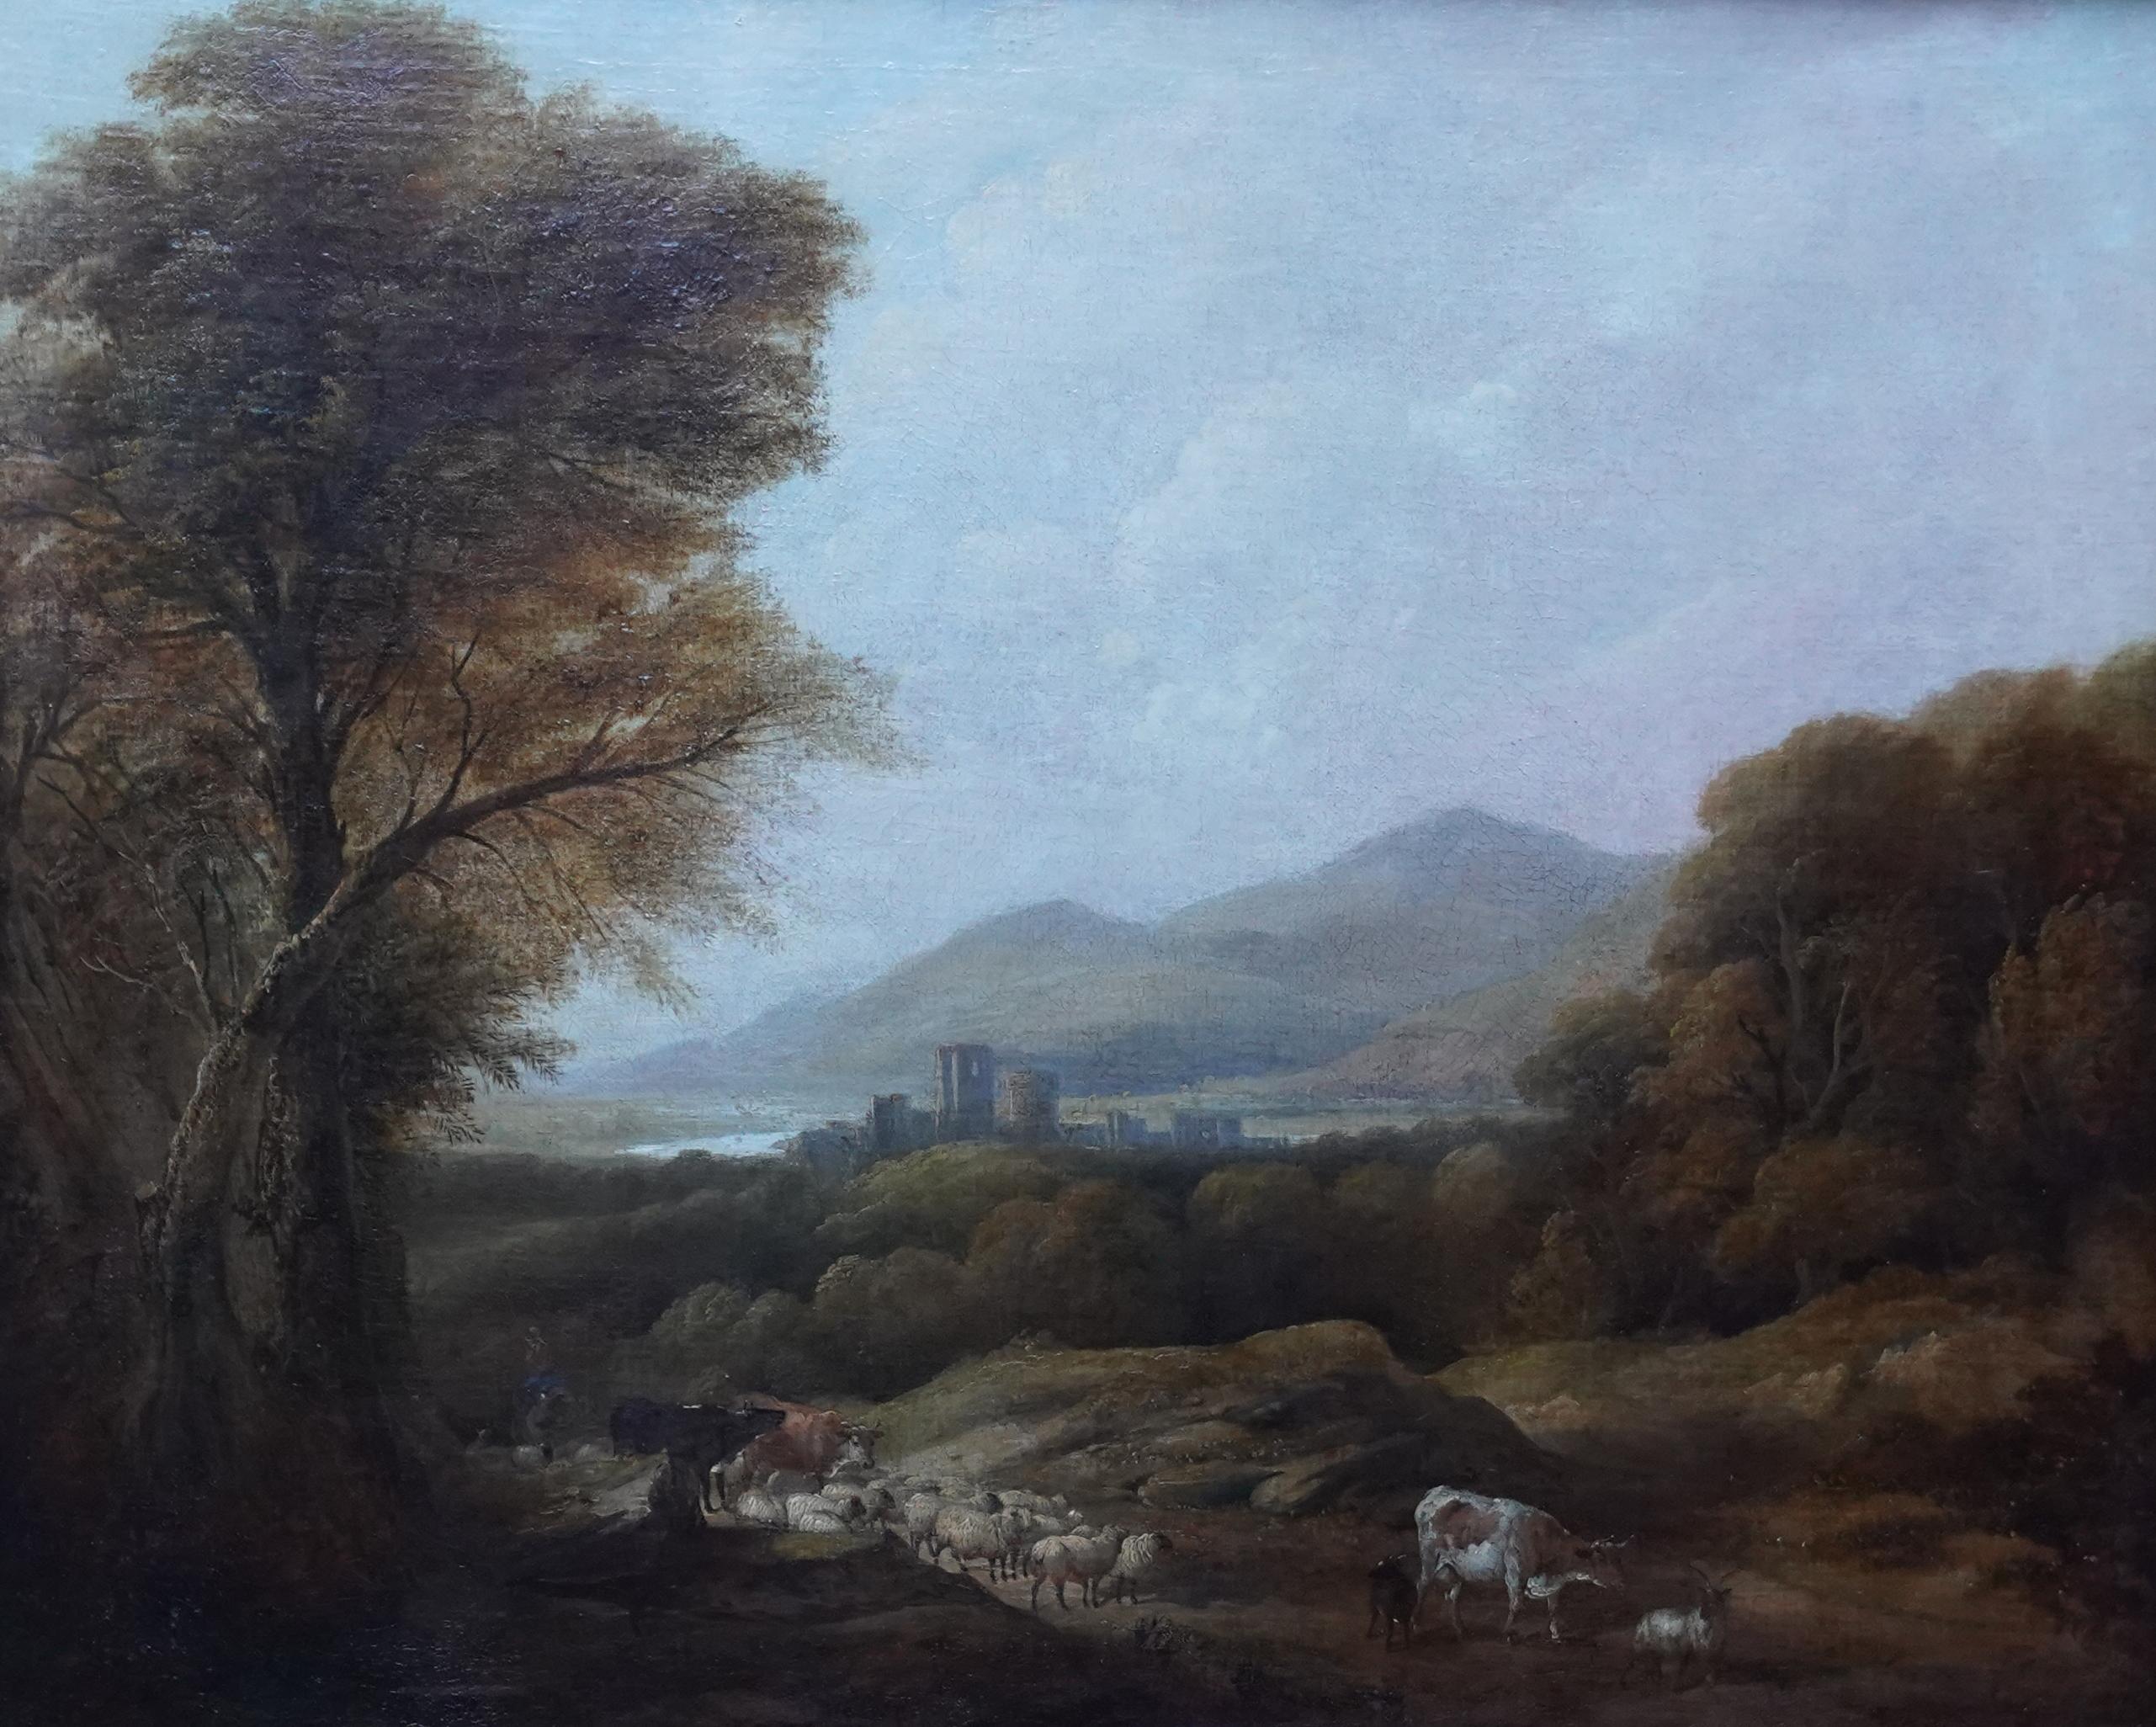 Cattle and Drover in a Landscape - British Victorian art landscape oil painting For Sale 6